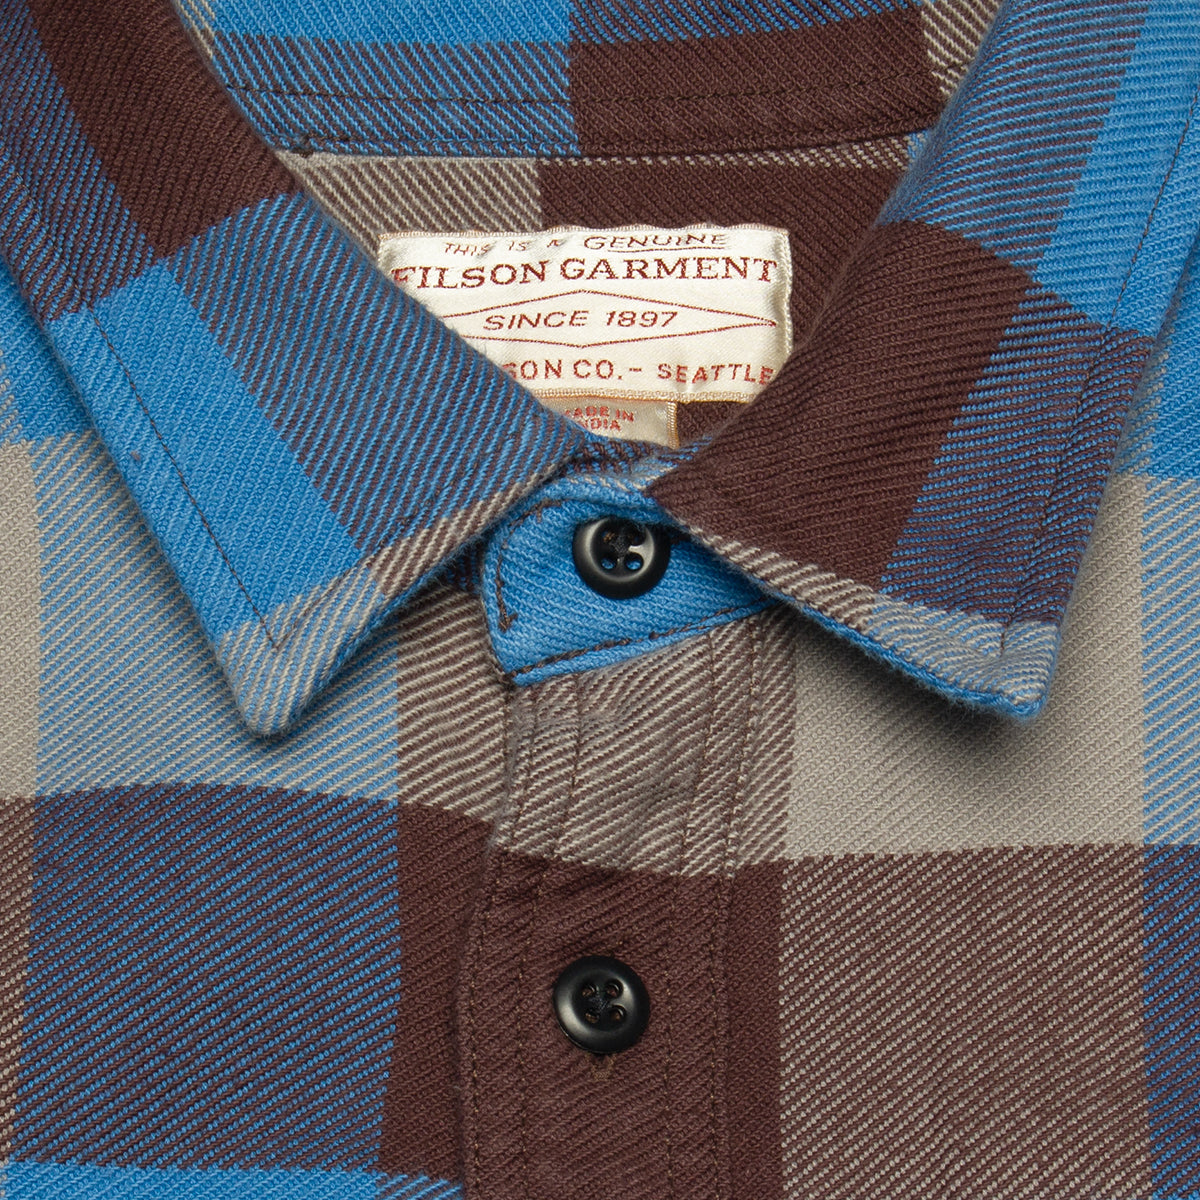 Filson | Vintage Flannel Work Shirt Style # 11010689 Color : Blue / Maroon / Gray Check